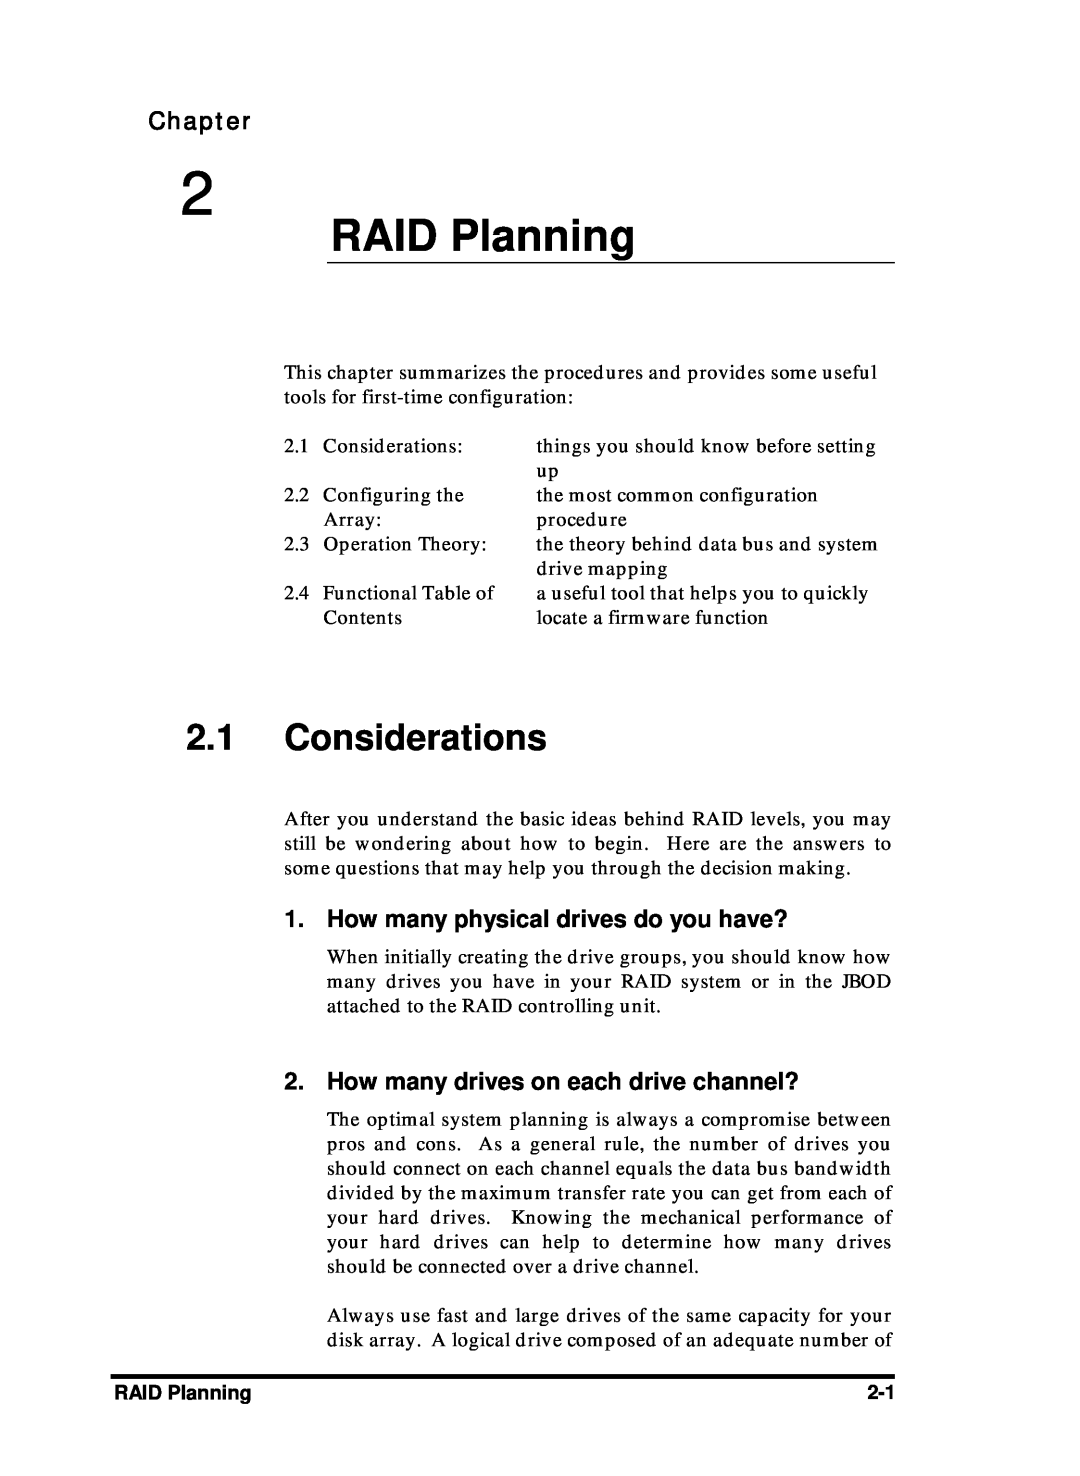 Compaq Infortrend manual RAID Planning, Considerations, How many physical drives do you have?, Chapter 